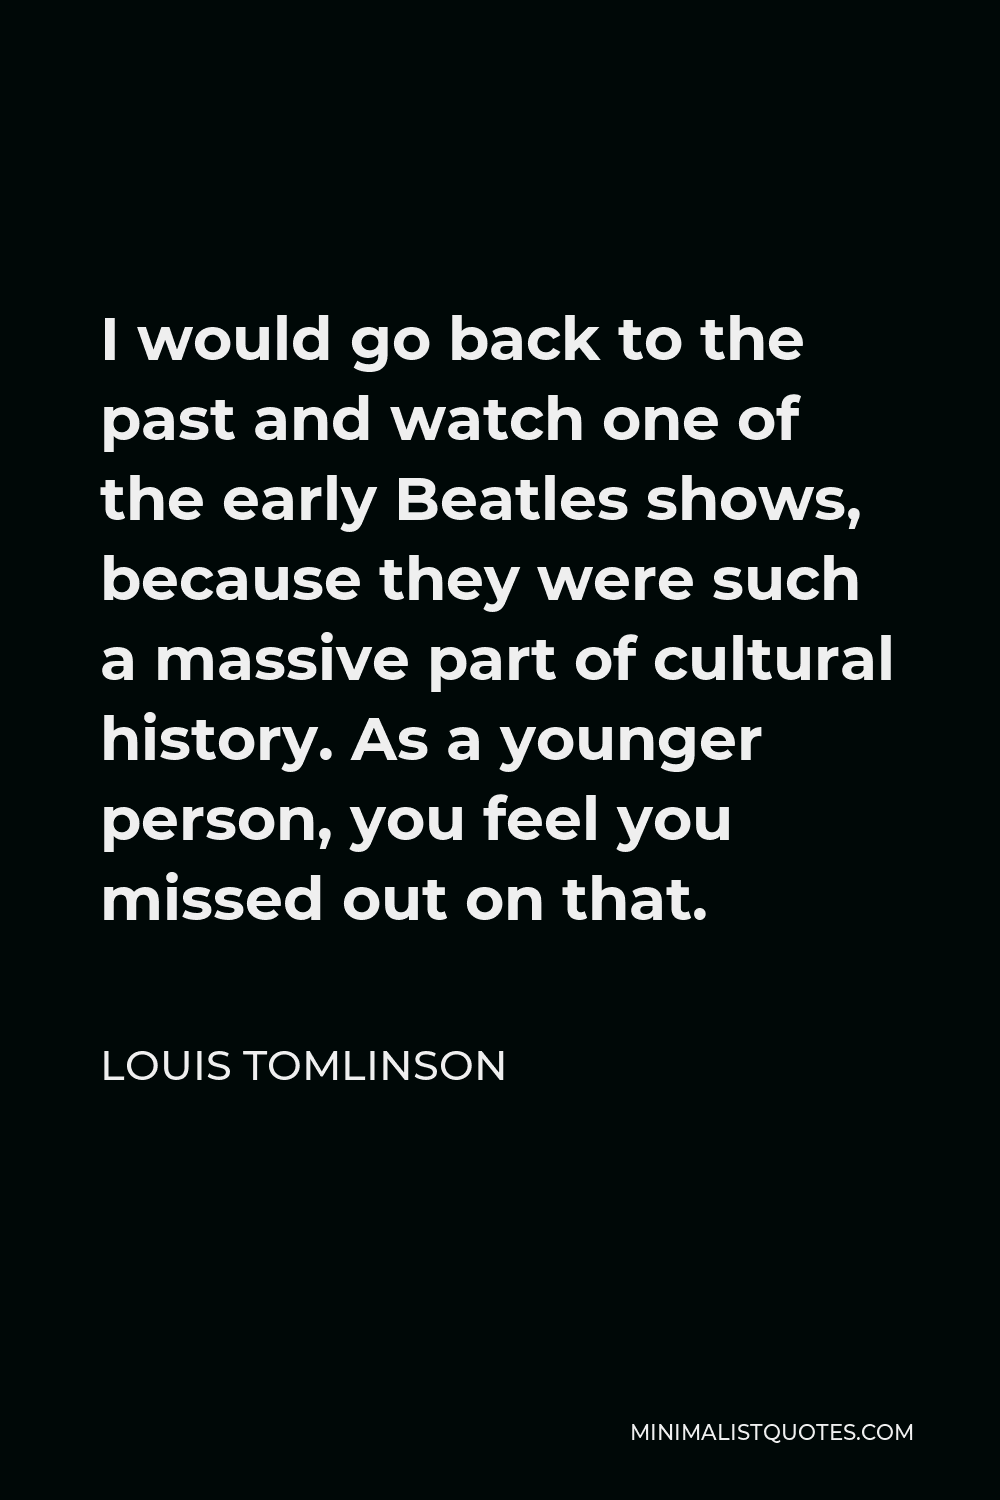 Louis Tomlinson Quote - I would go back to the past and watch one of the early Beatles shows, because they were such a massive part of cultural history. As a younger person, you feel you missed out on that.